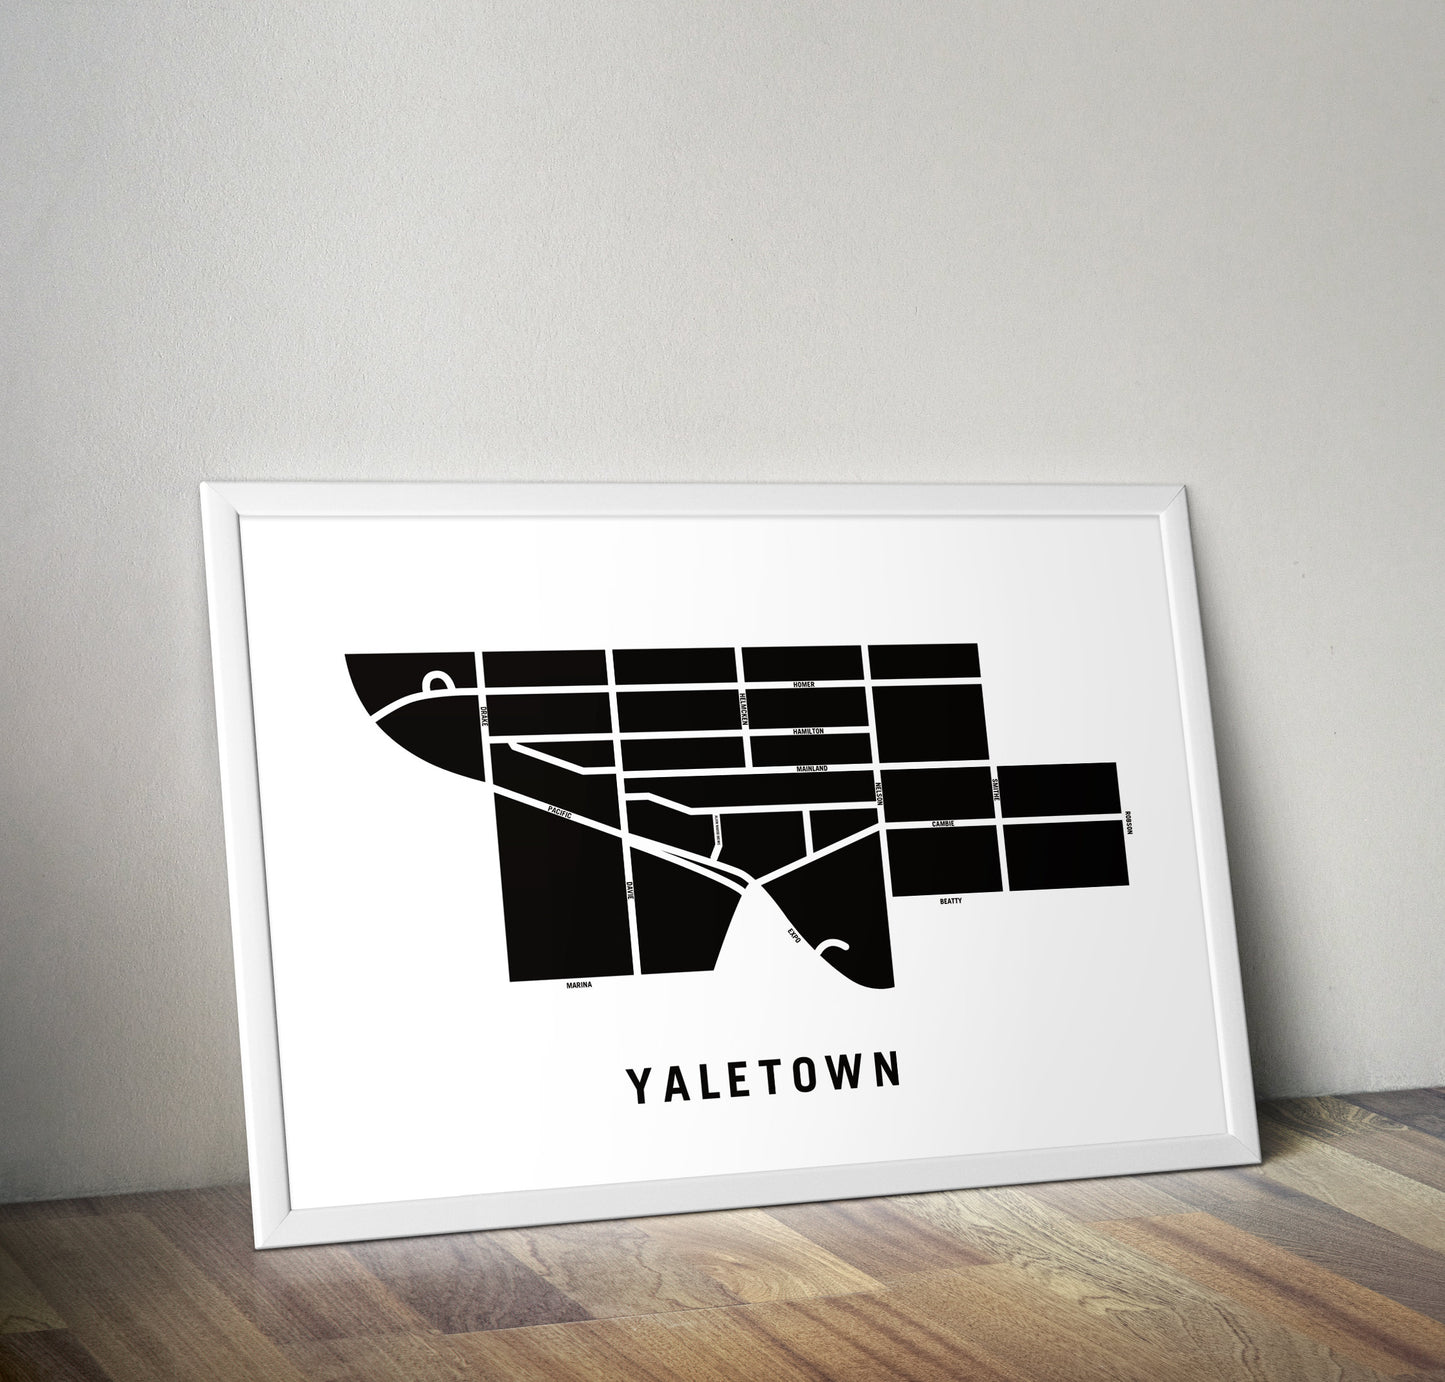 Yaletown Map, Vancouver